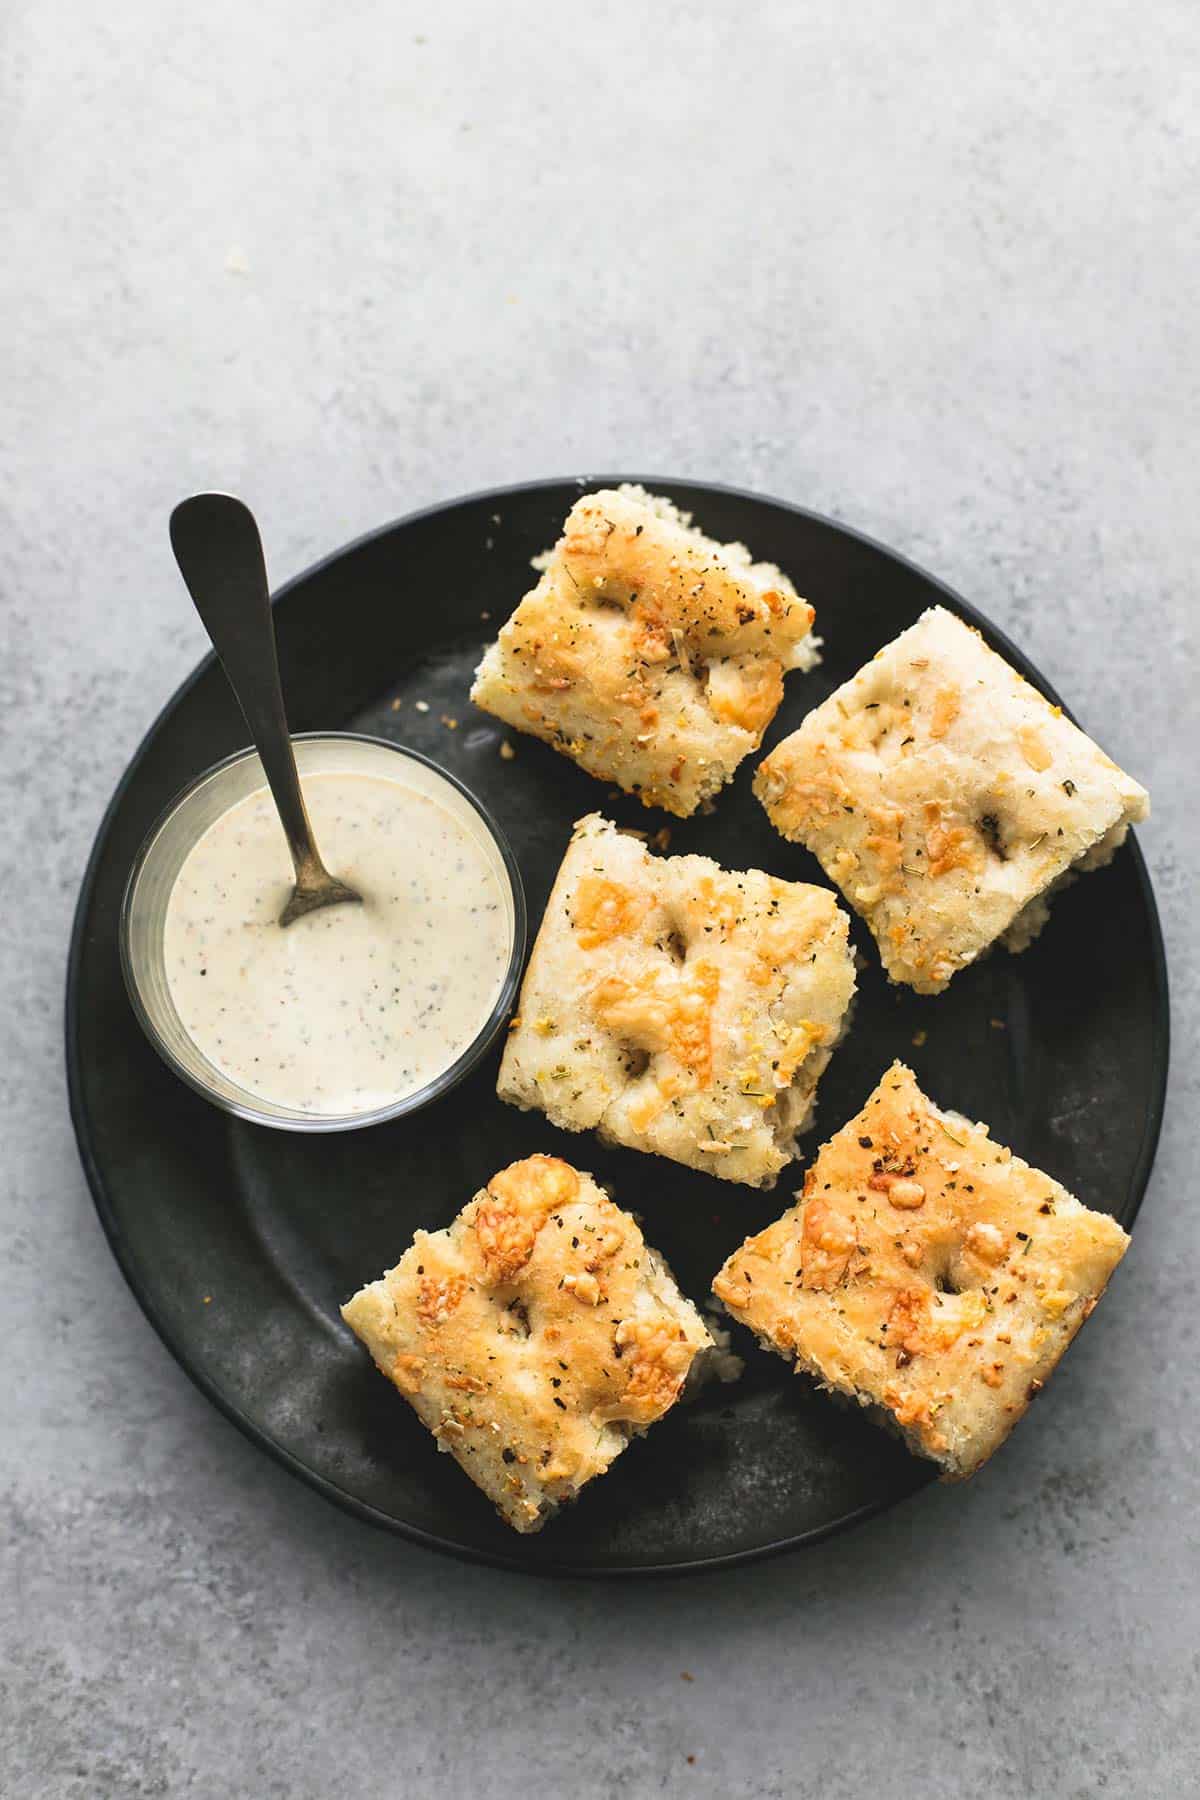 top view of focaccia bread pieces with a bowl of dipping sauce and a spoon on the side all on a plate.